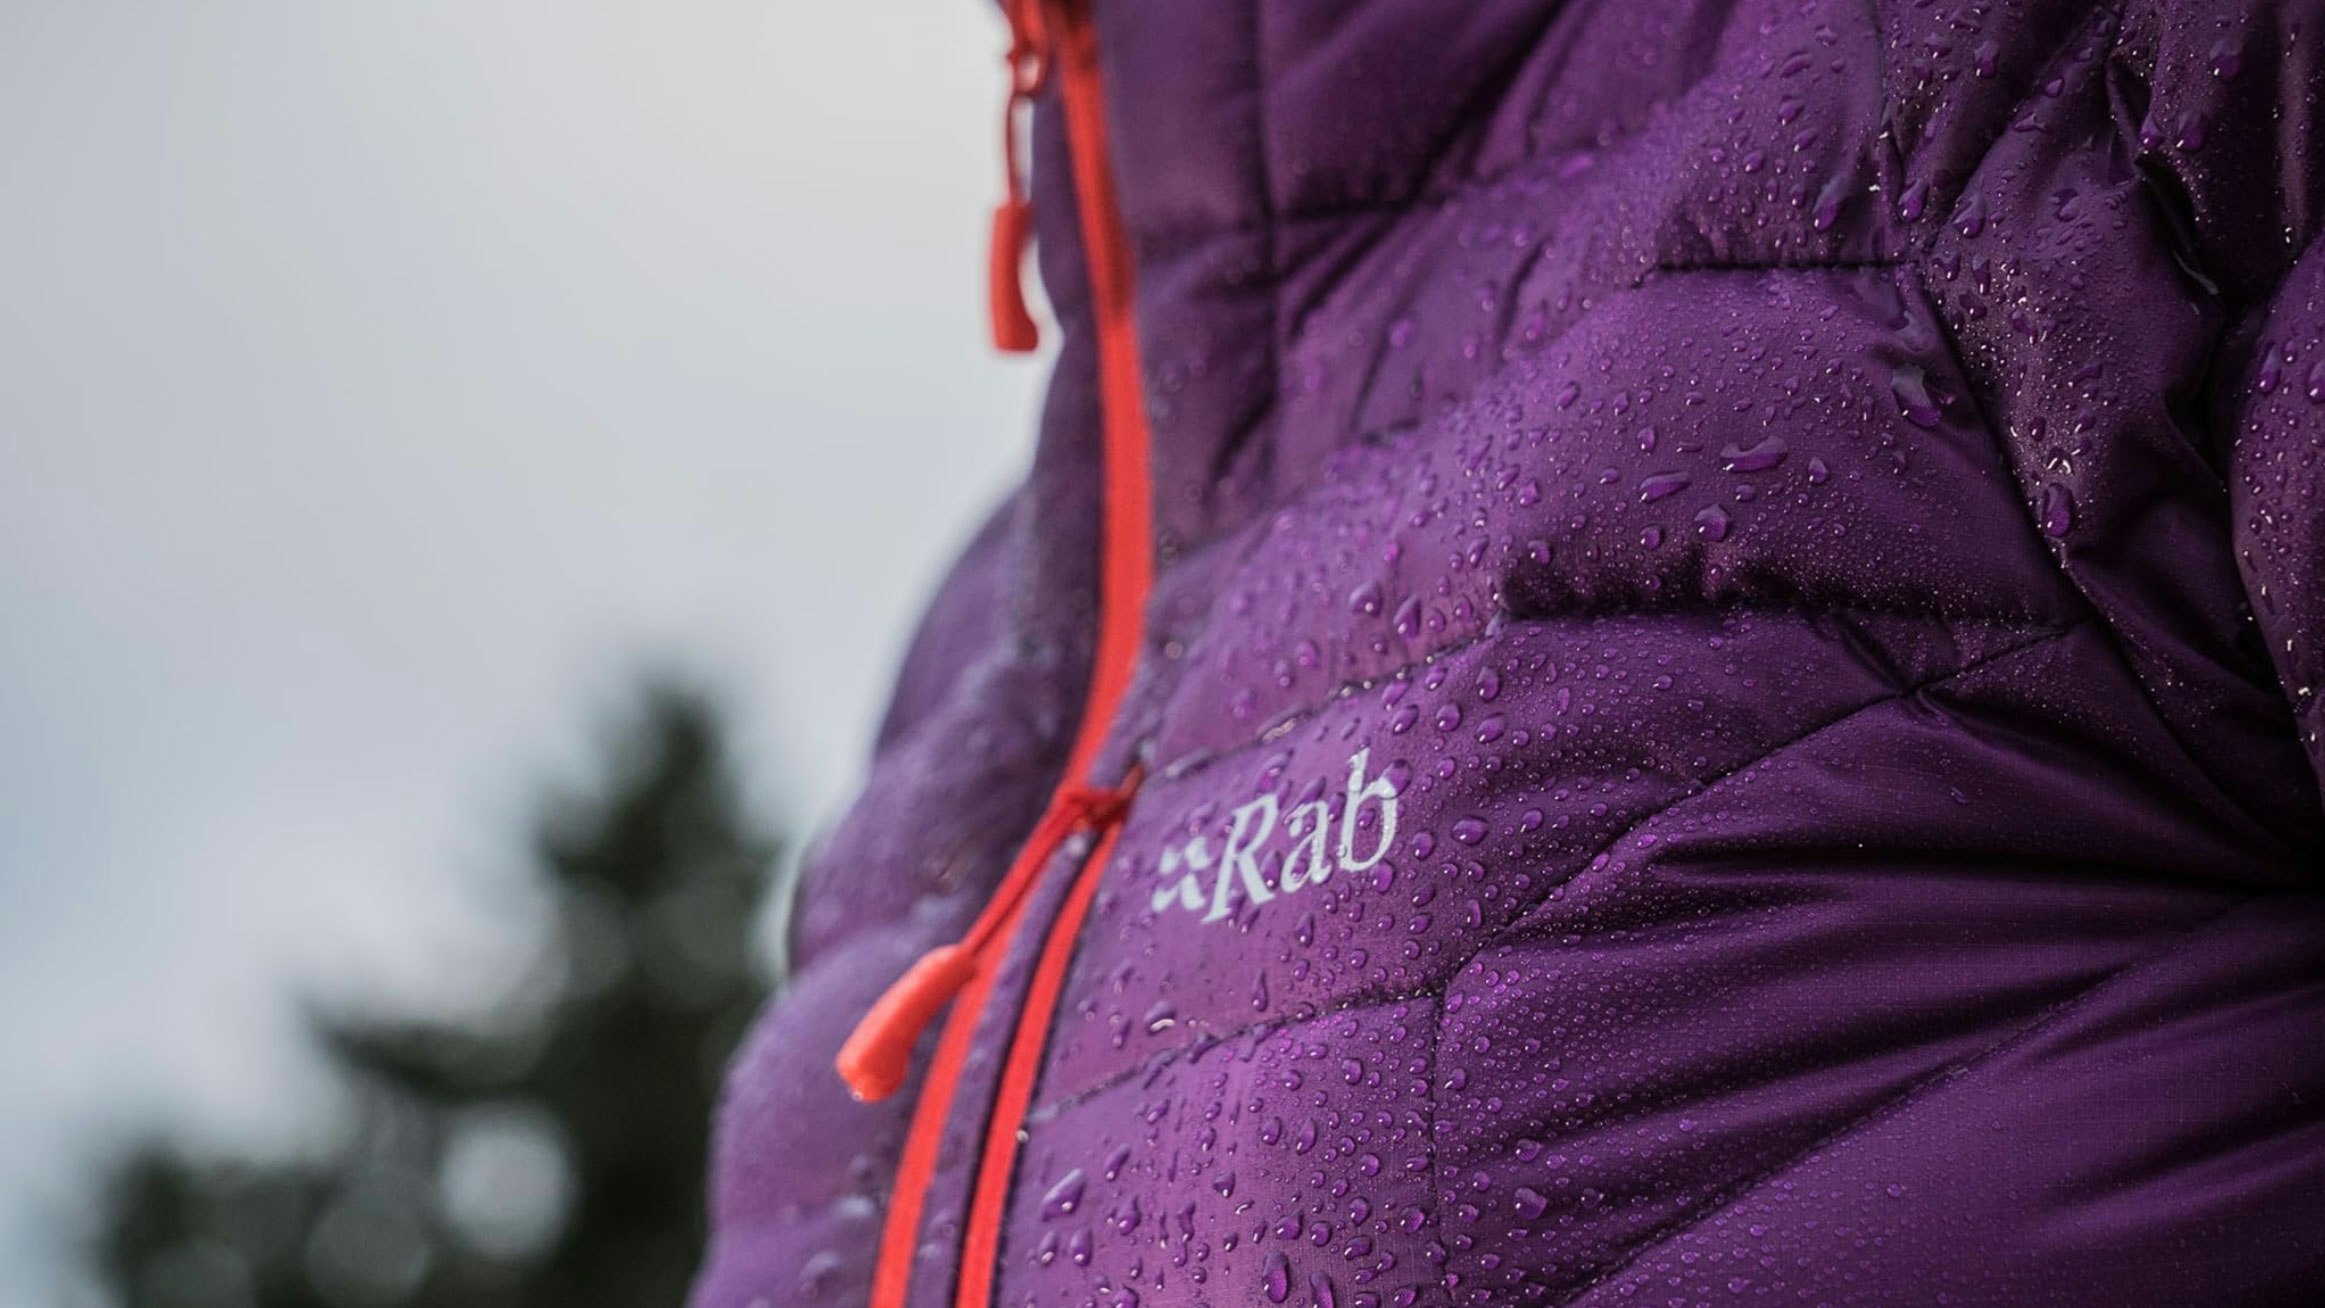 UKC Gear - COMPETITION: WINNER - Win a Rab Microlight Down Jacket and Nikwax  Down Care Kit